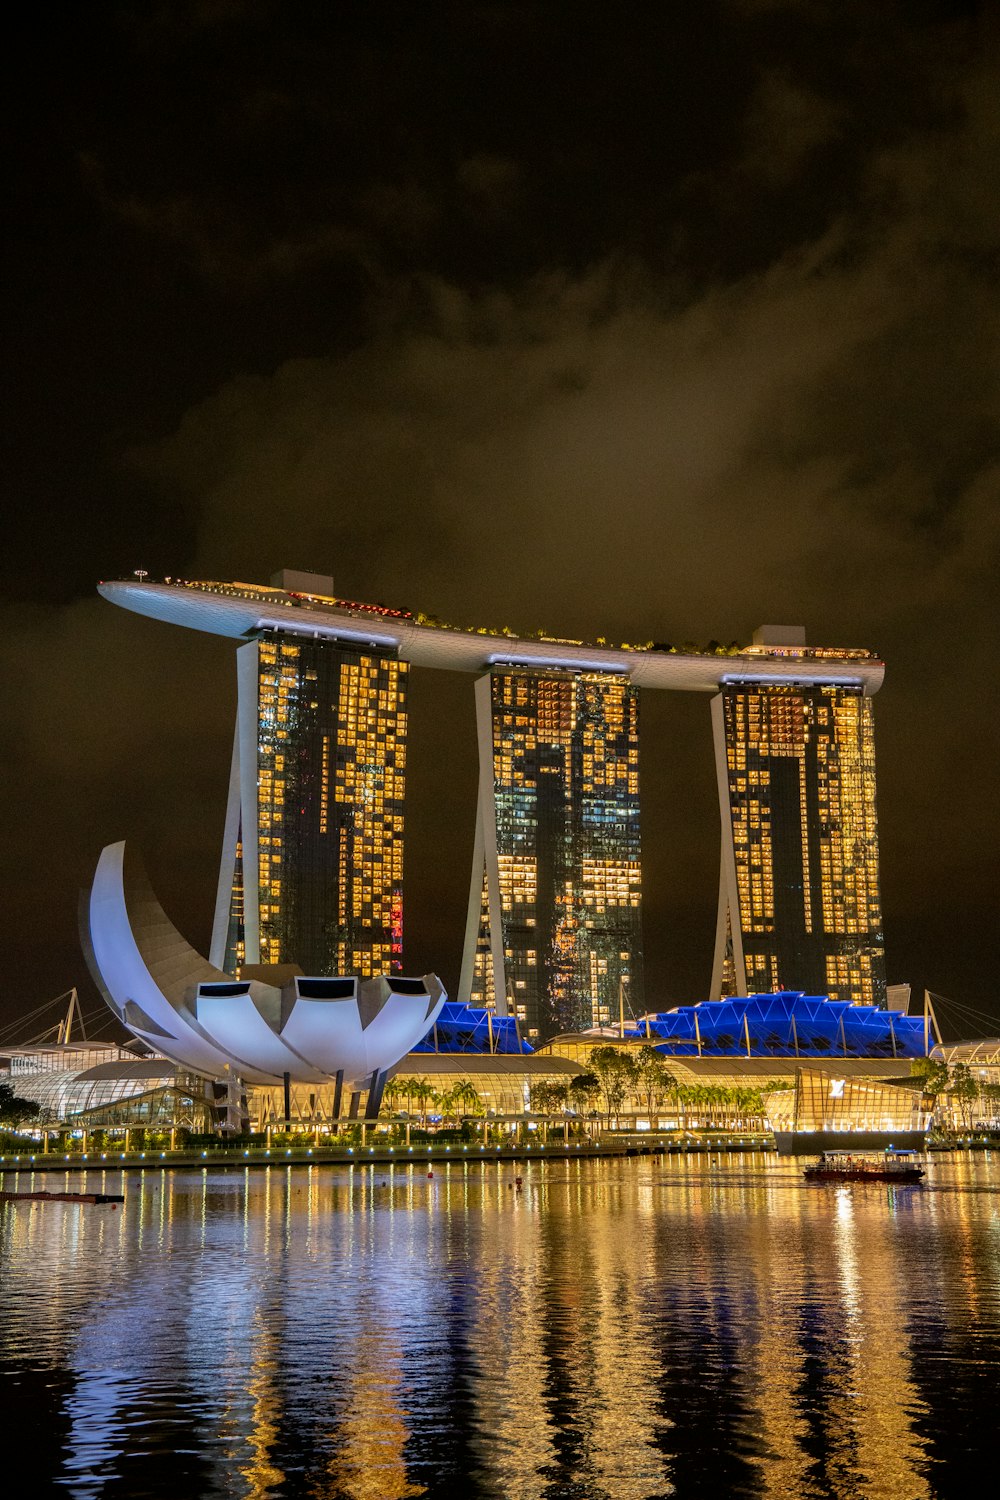 Marina Bay Sands with a large satellite dish